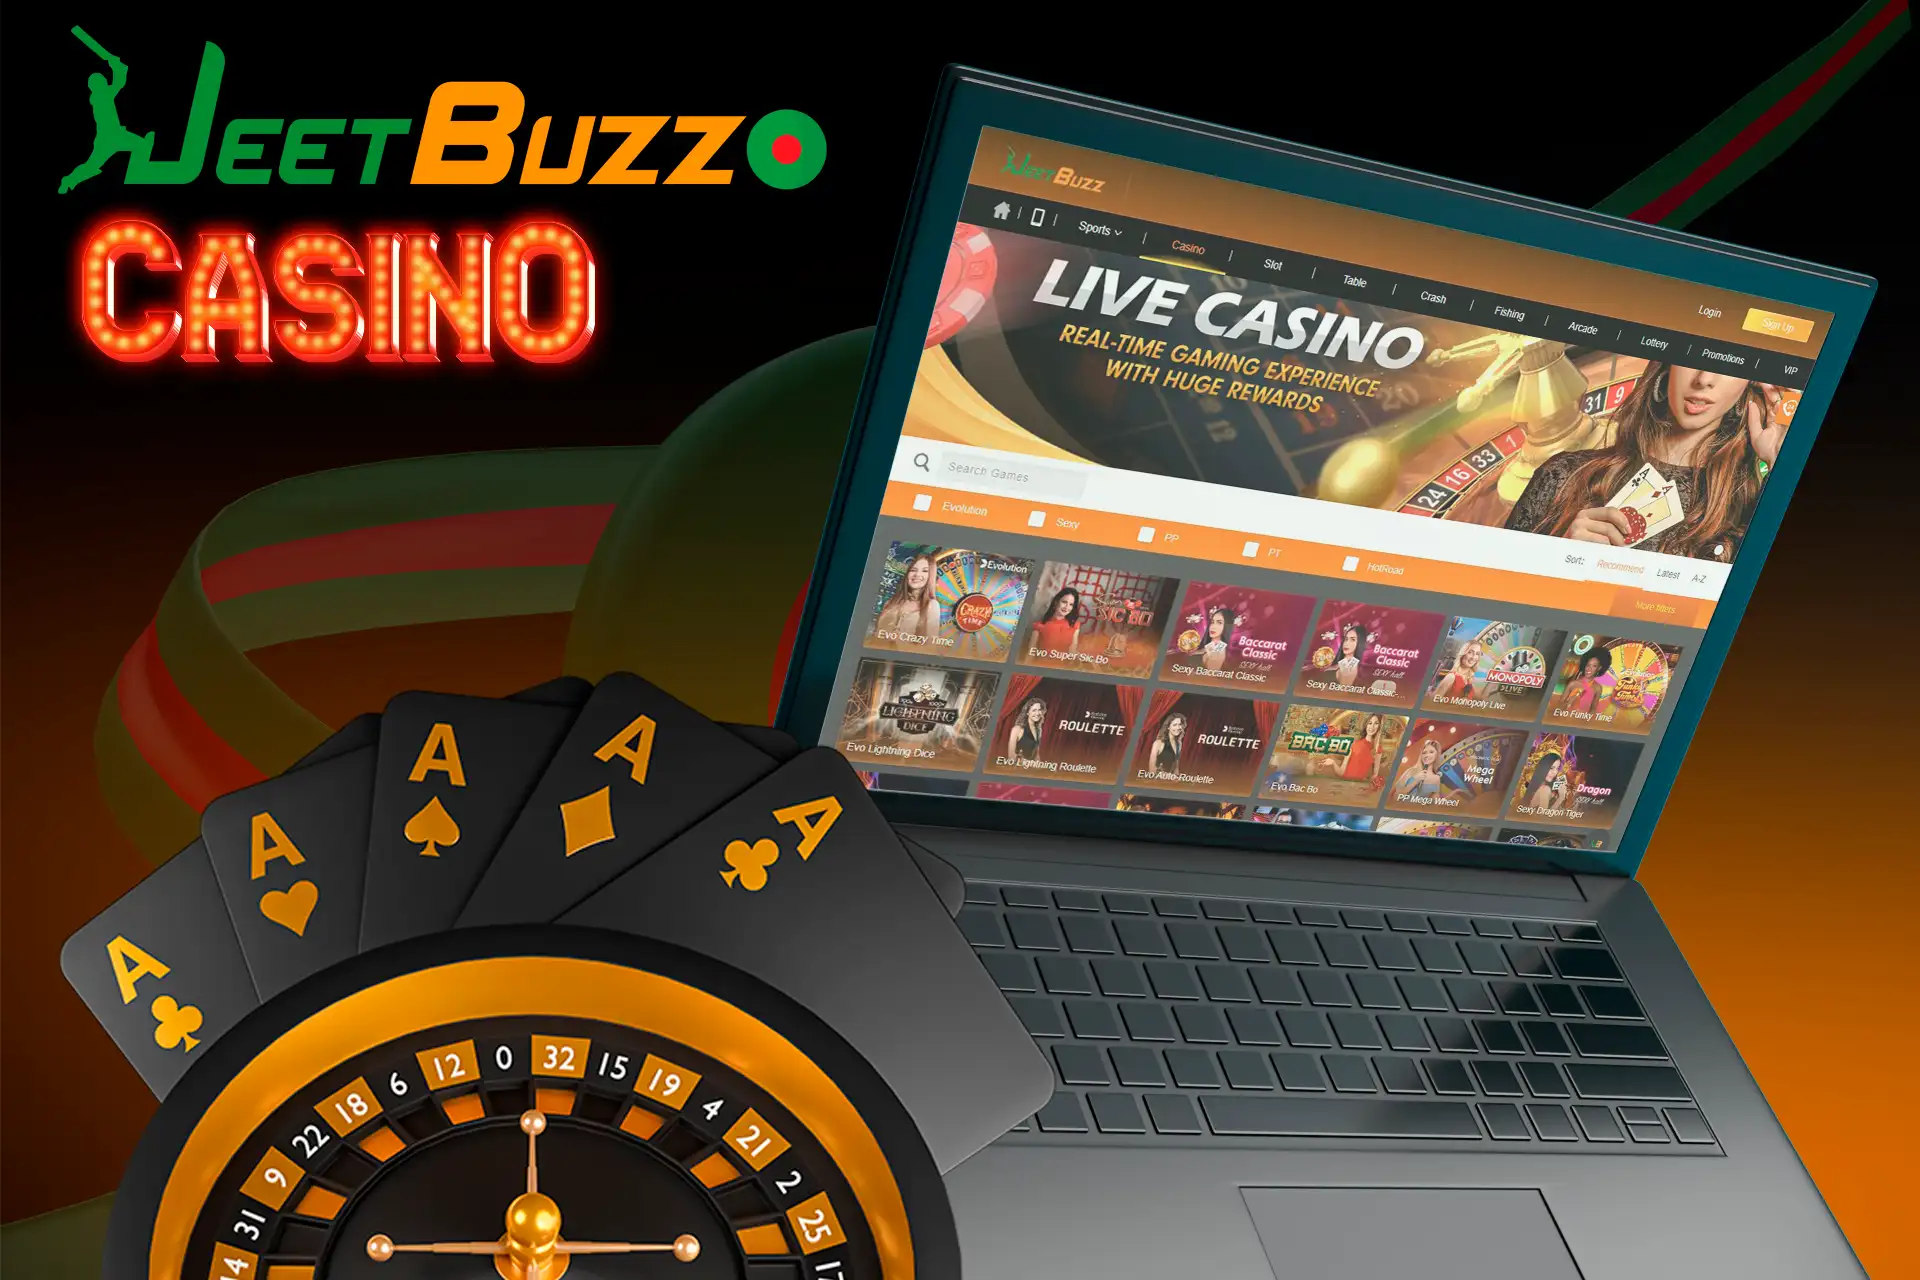 Brief information about the casino